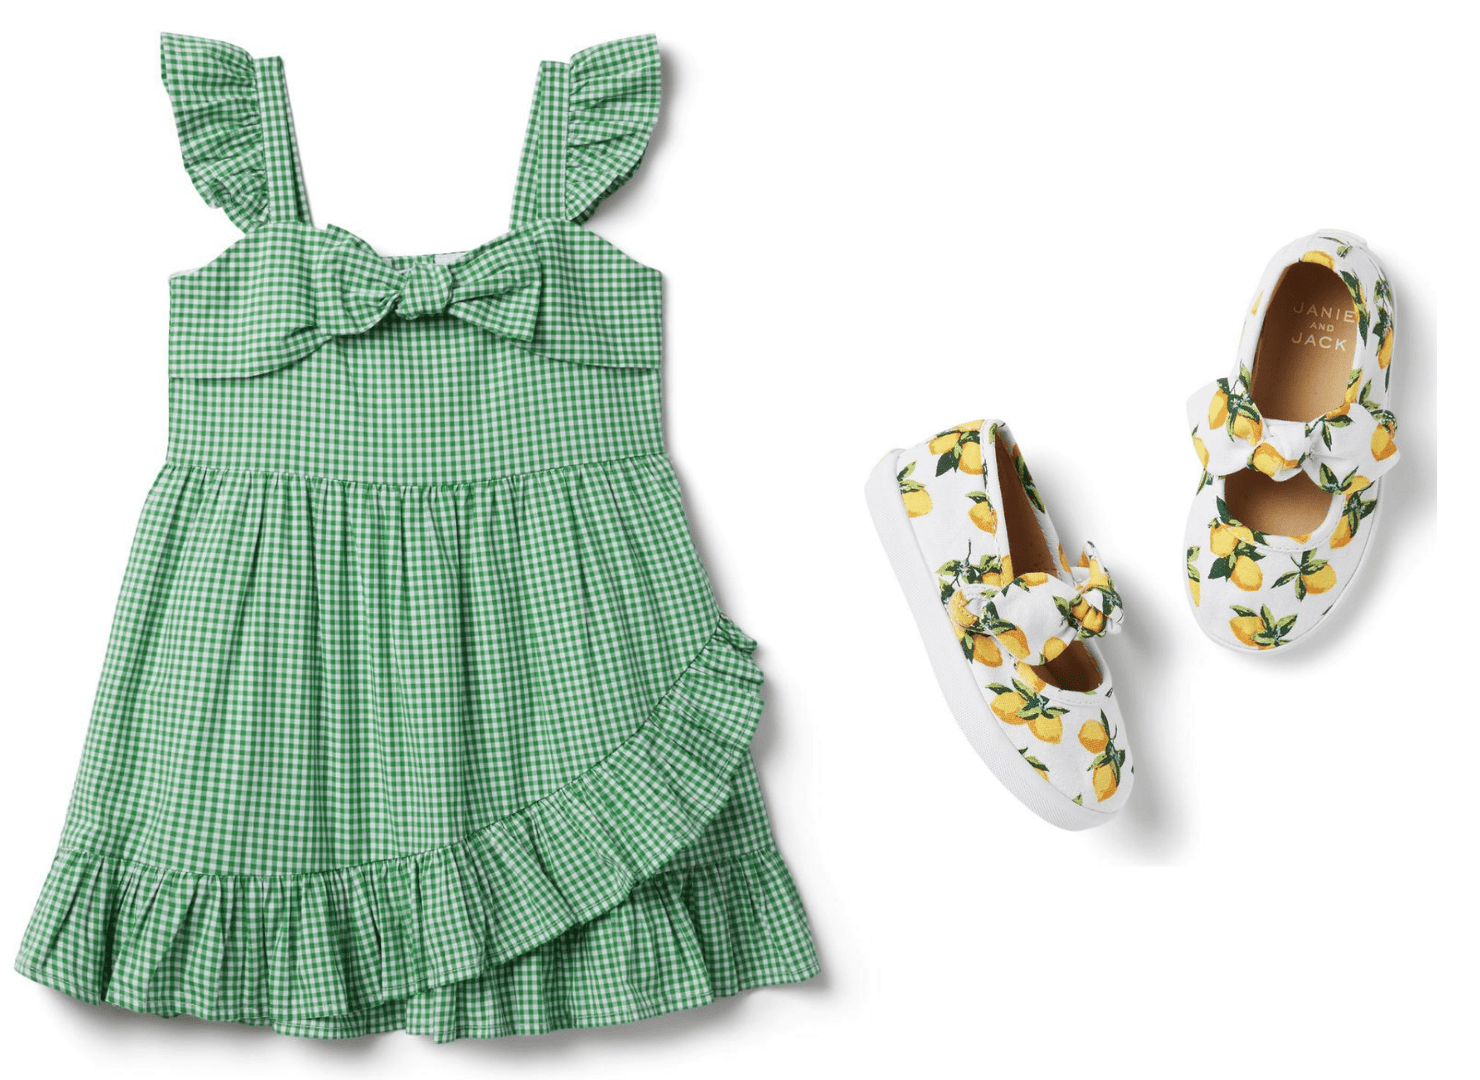 10 Spring and Summer Outfits for Toddler Girls